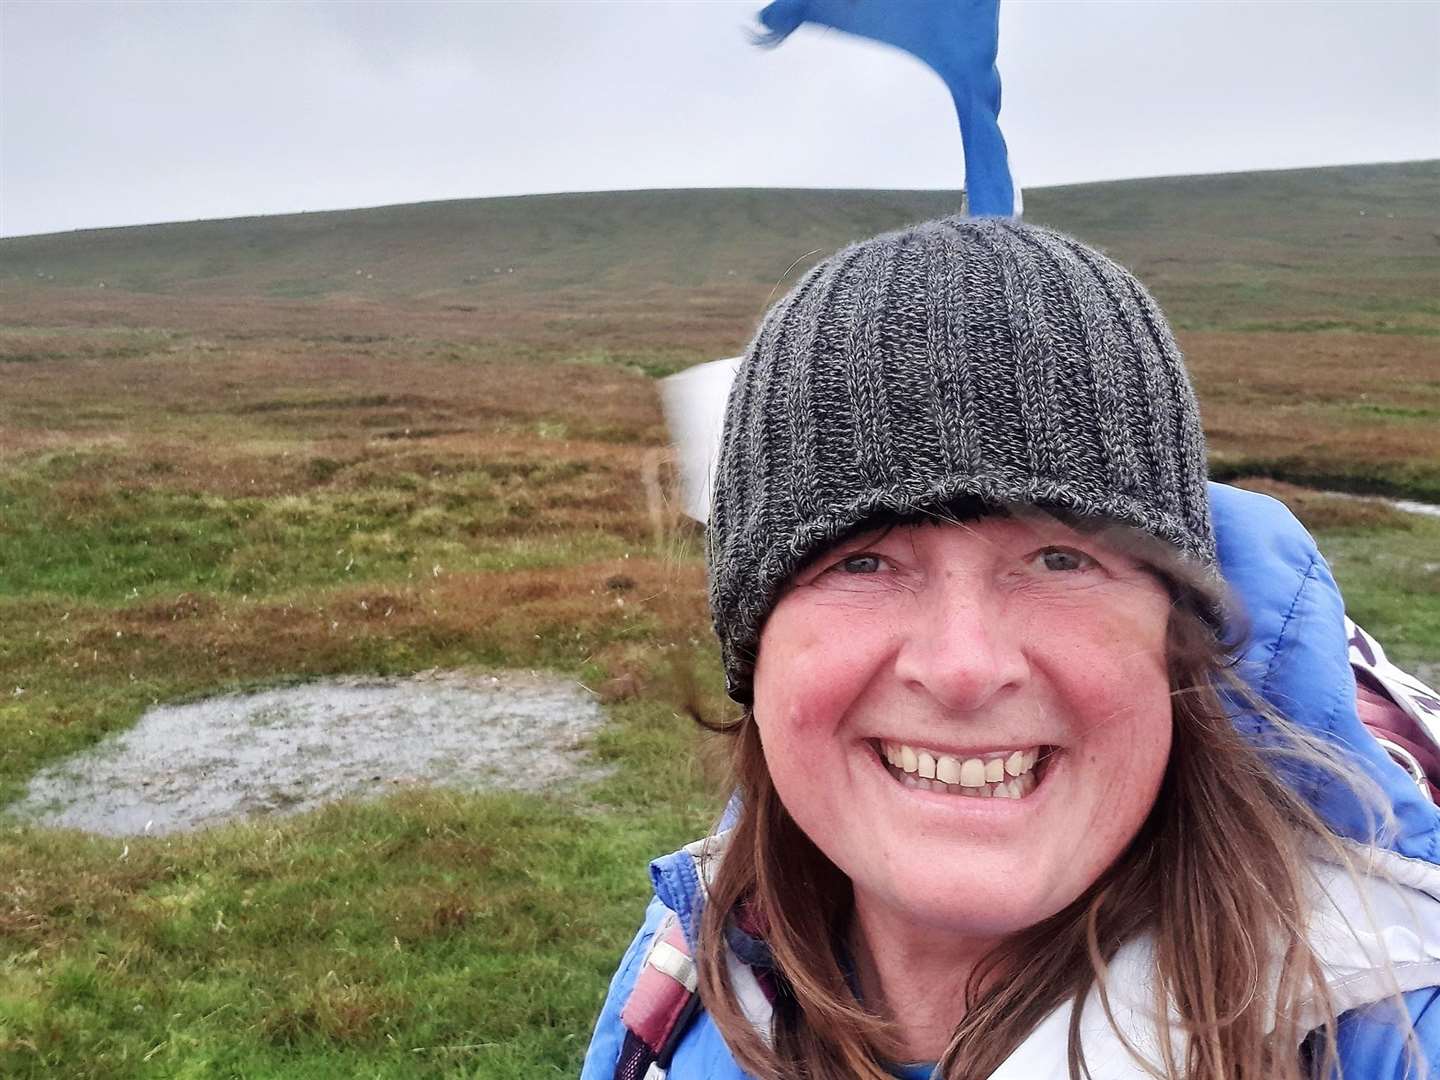 Karen Penny reaches her final destination having walked 10,500 miles and covered the entire UK and Irish coastline.